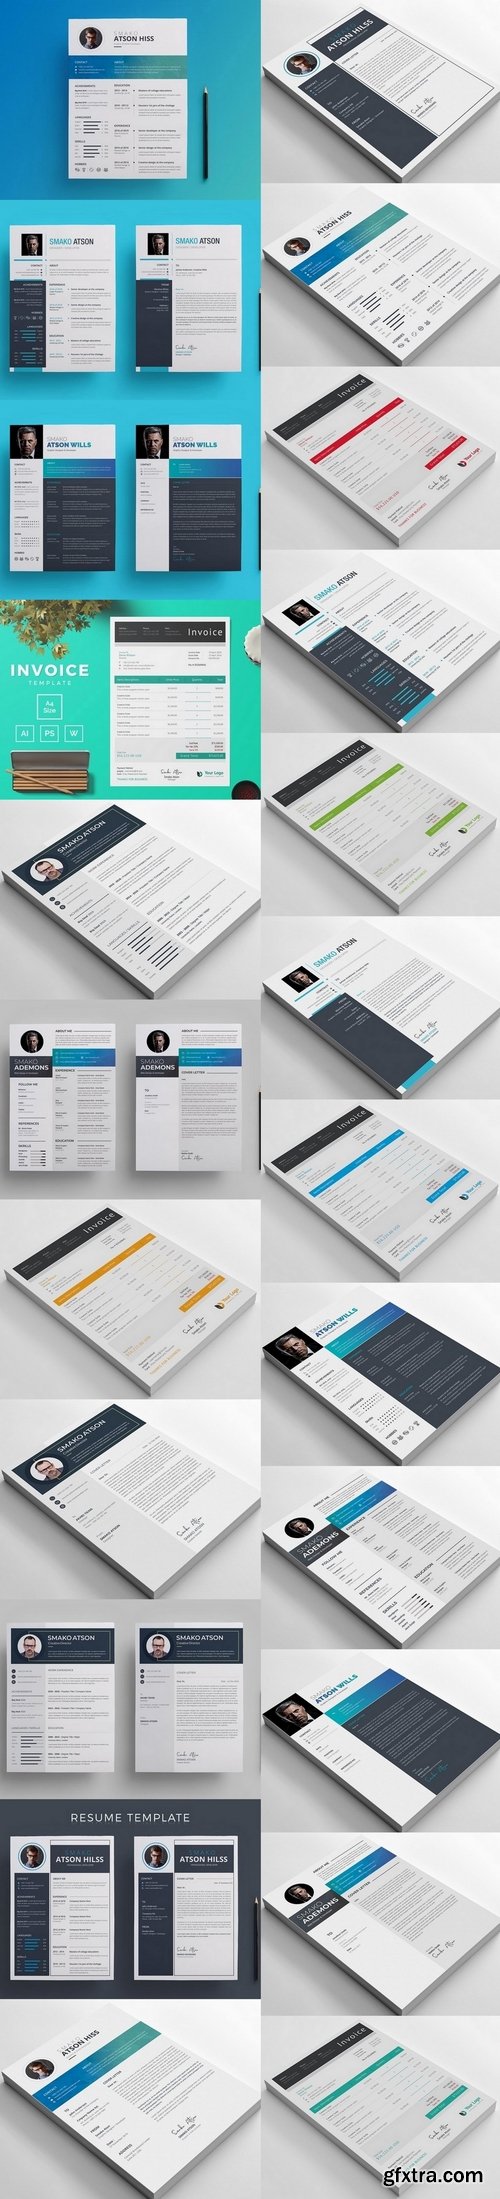 Resume and Invoice Templates Pack